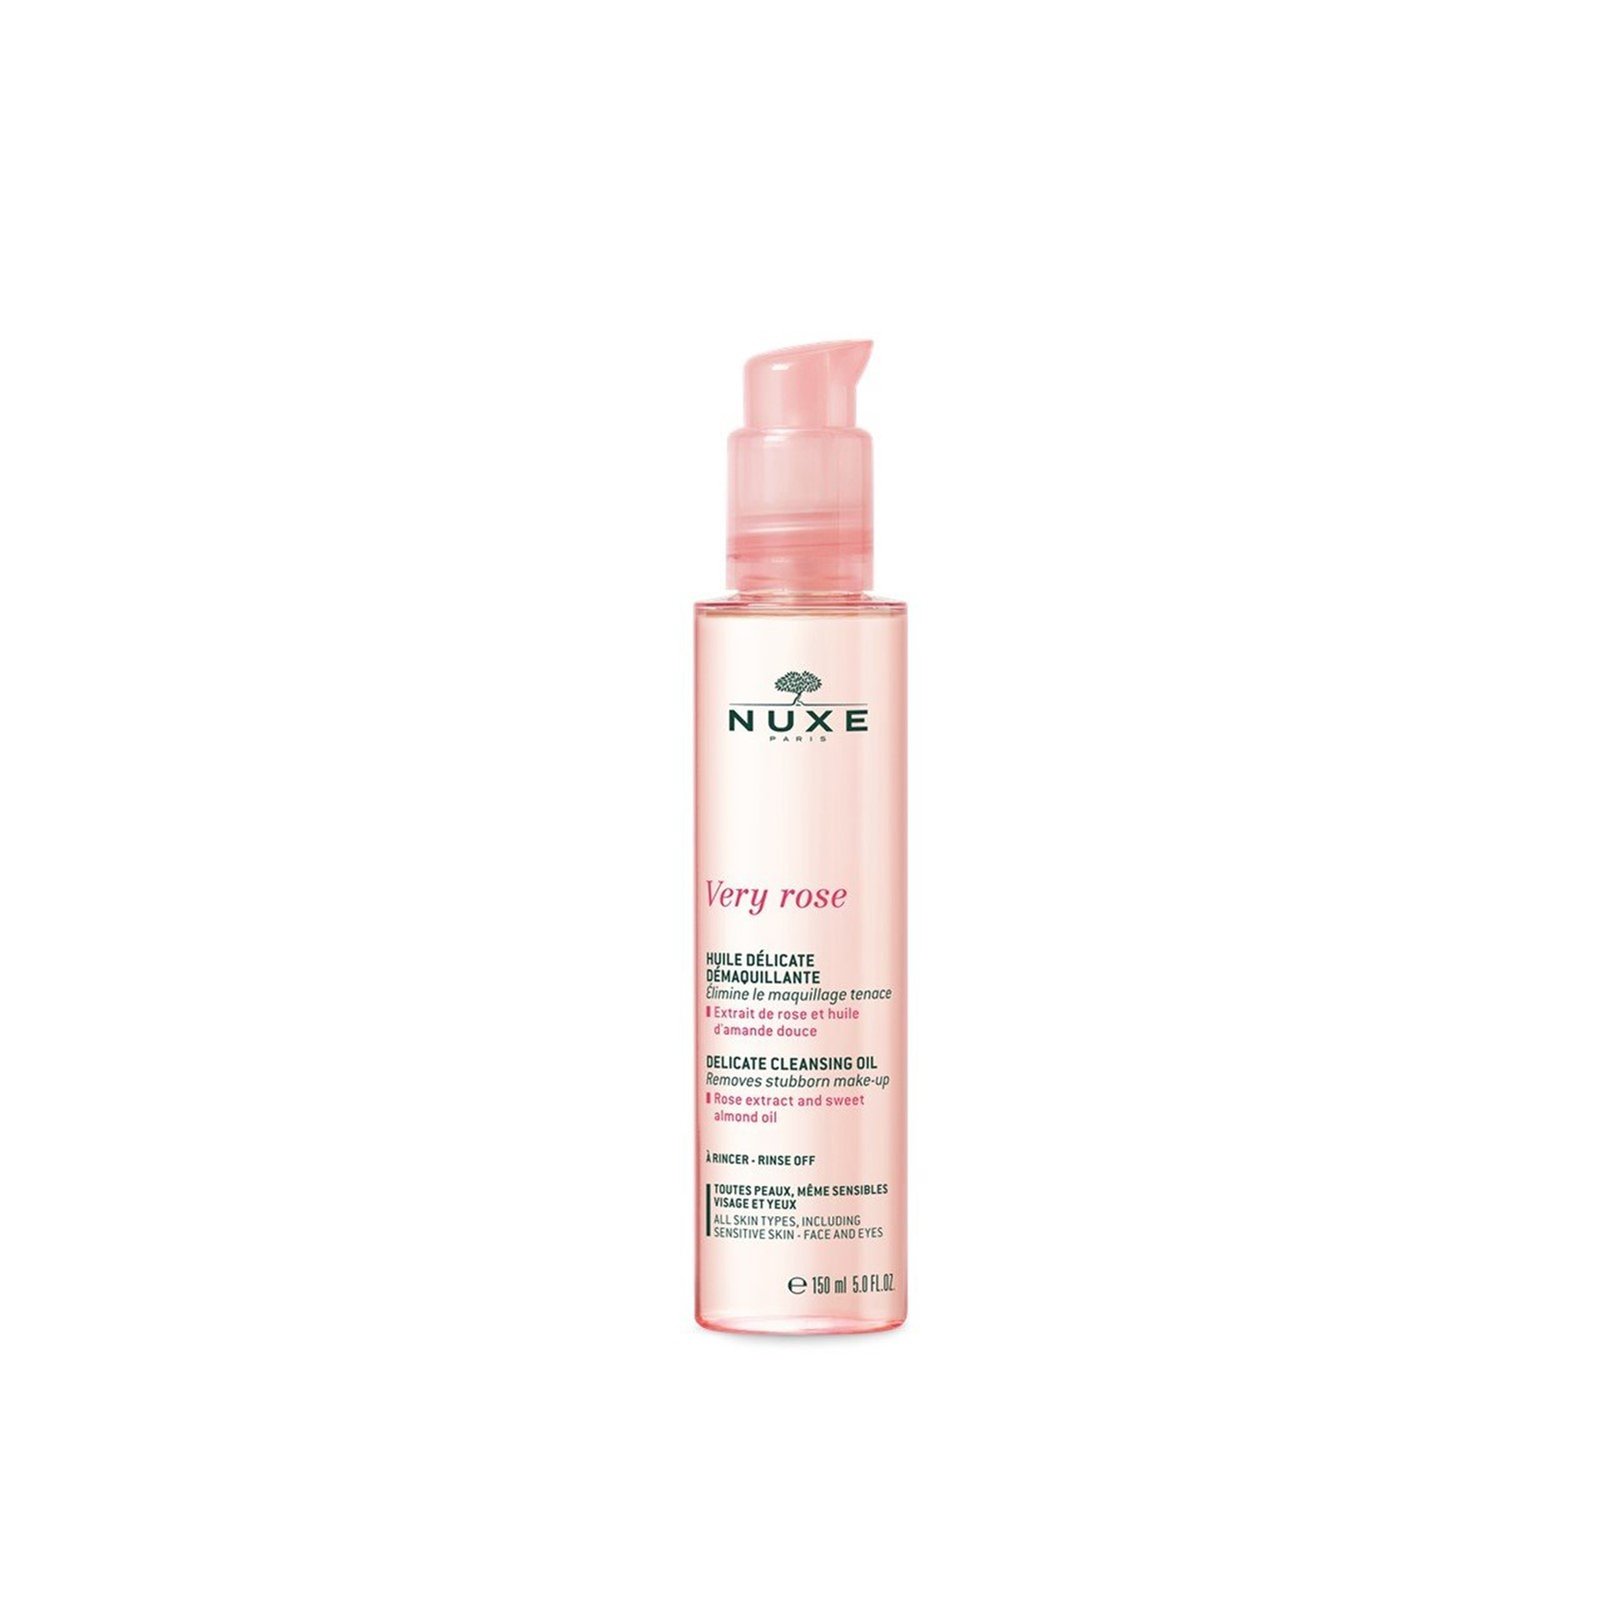 NUXE Very Rose Delicate Cleansing Oil 150ml (5.07fl oz)